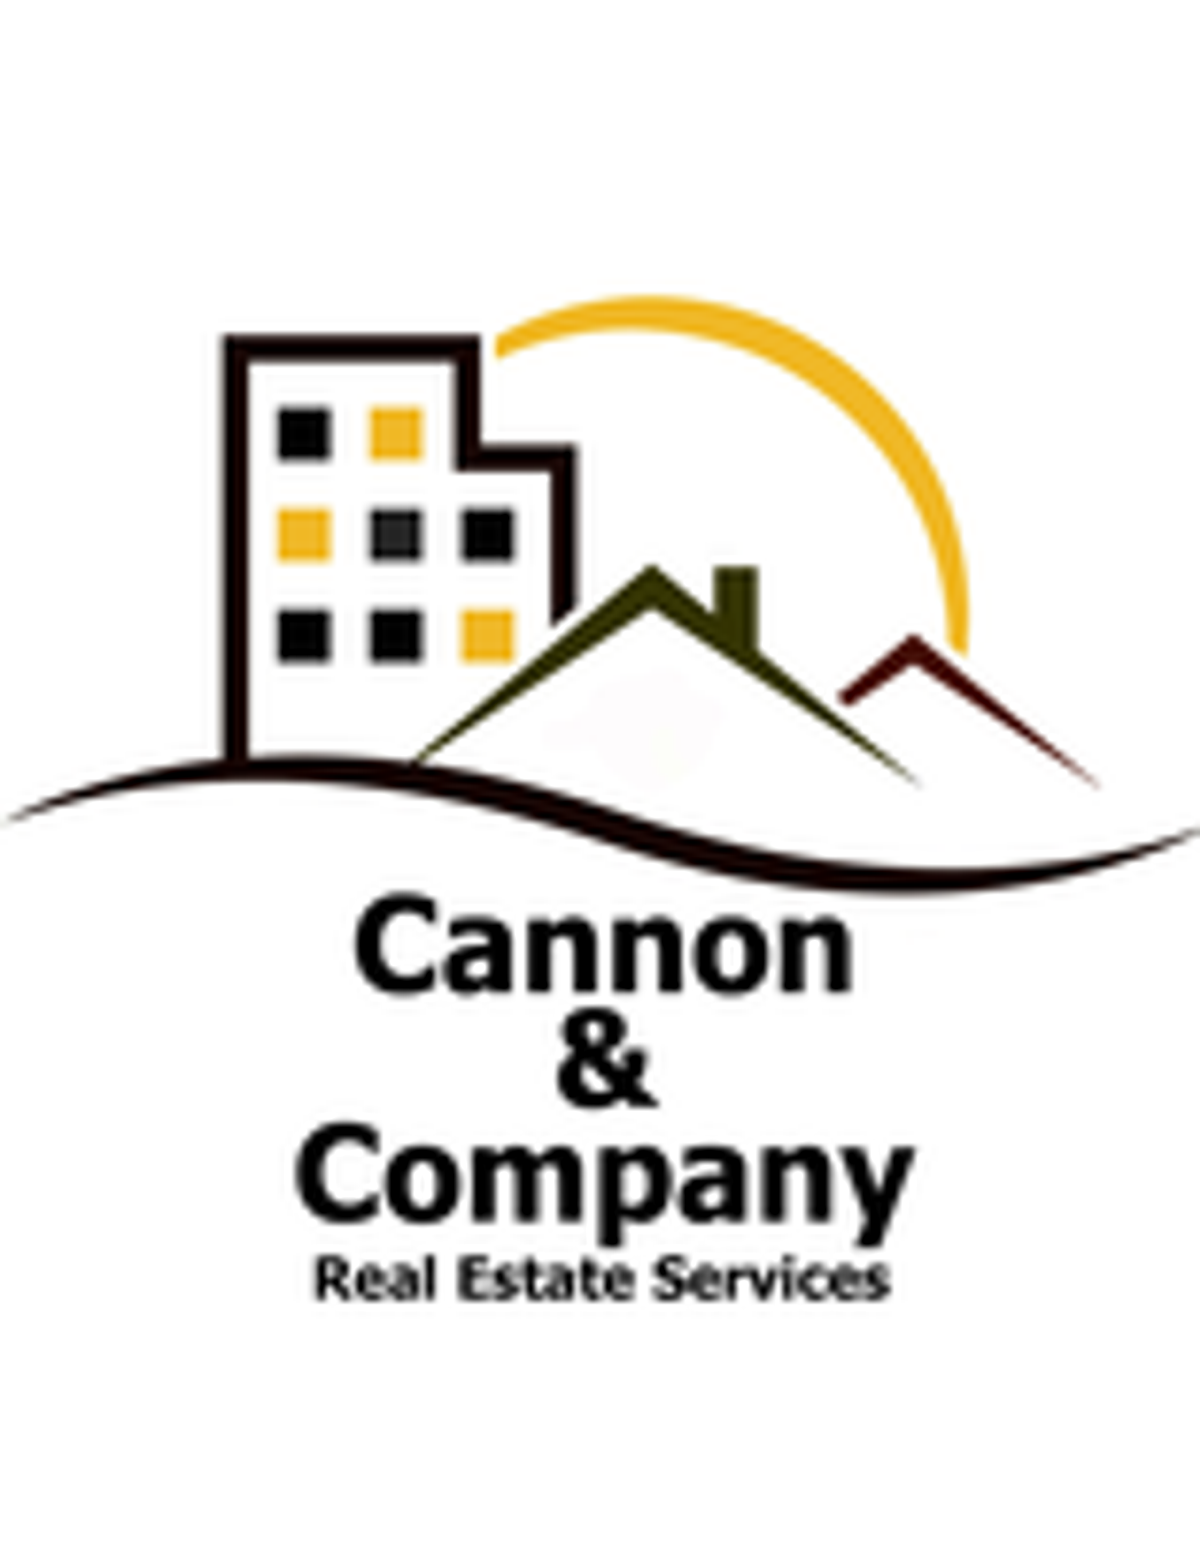 Photo for Rick Andra, Listing Agent at Cannon & Company